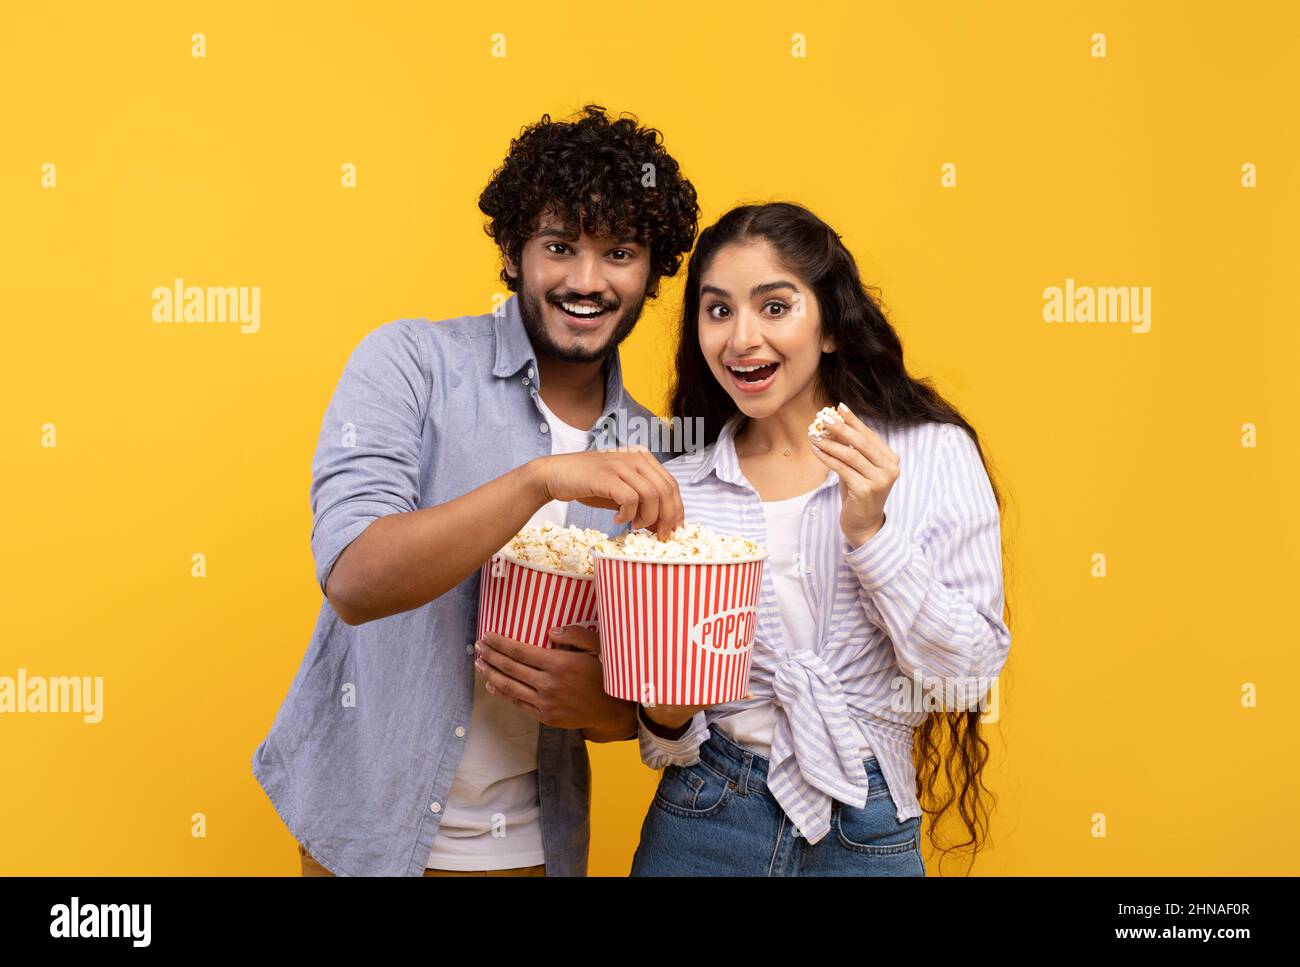 Amazing entertainment, leisure time together. Surprised indian guy and lady eating popcorn and watching movie Stock Photo